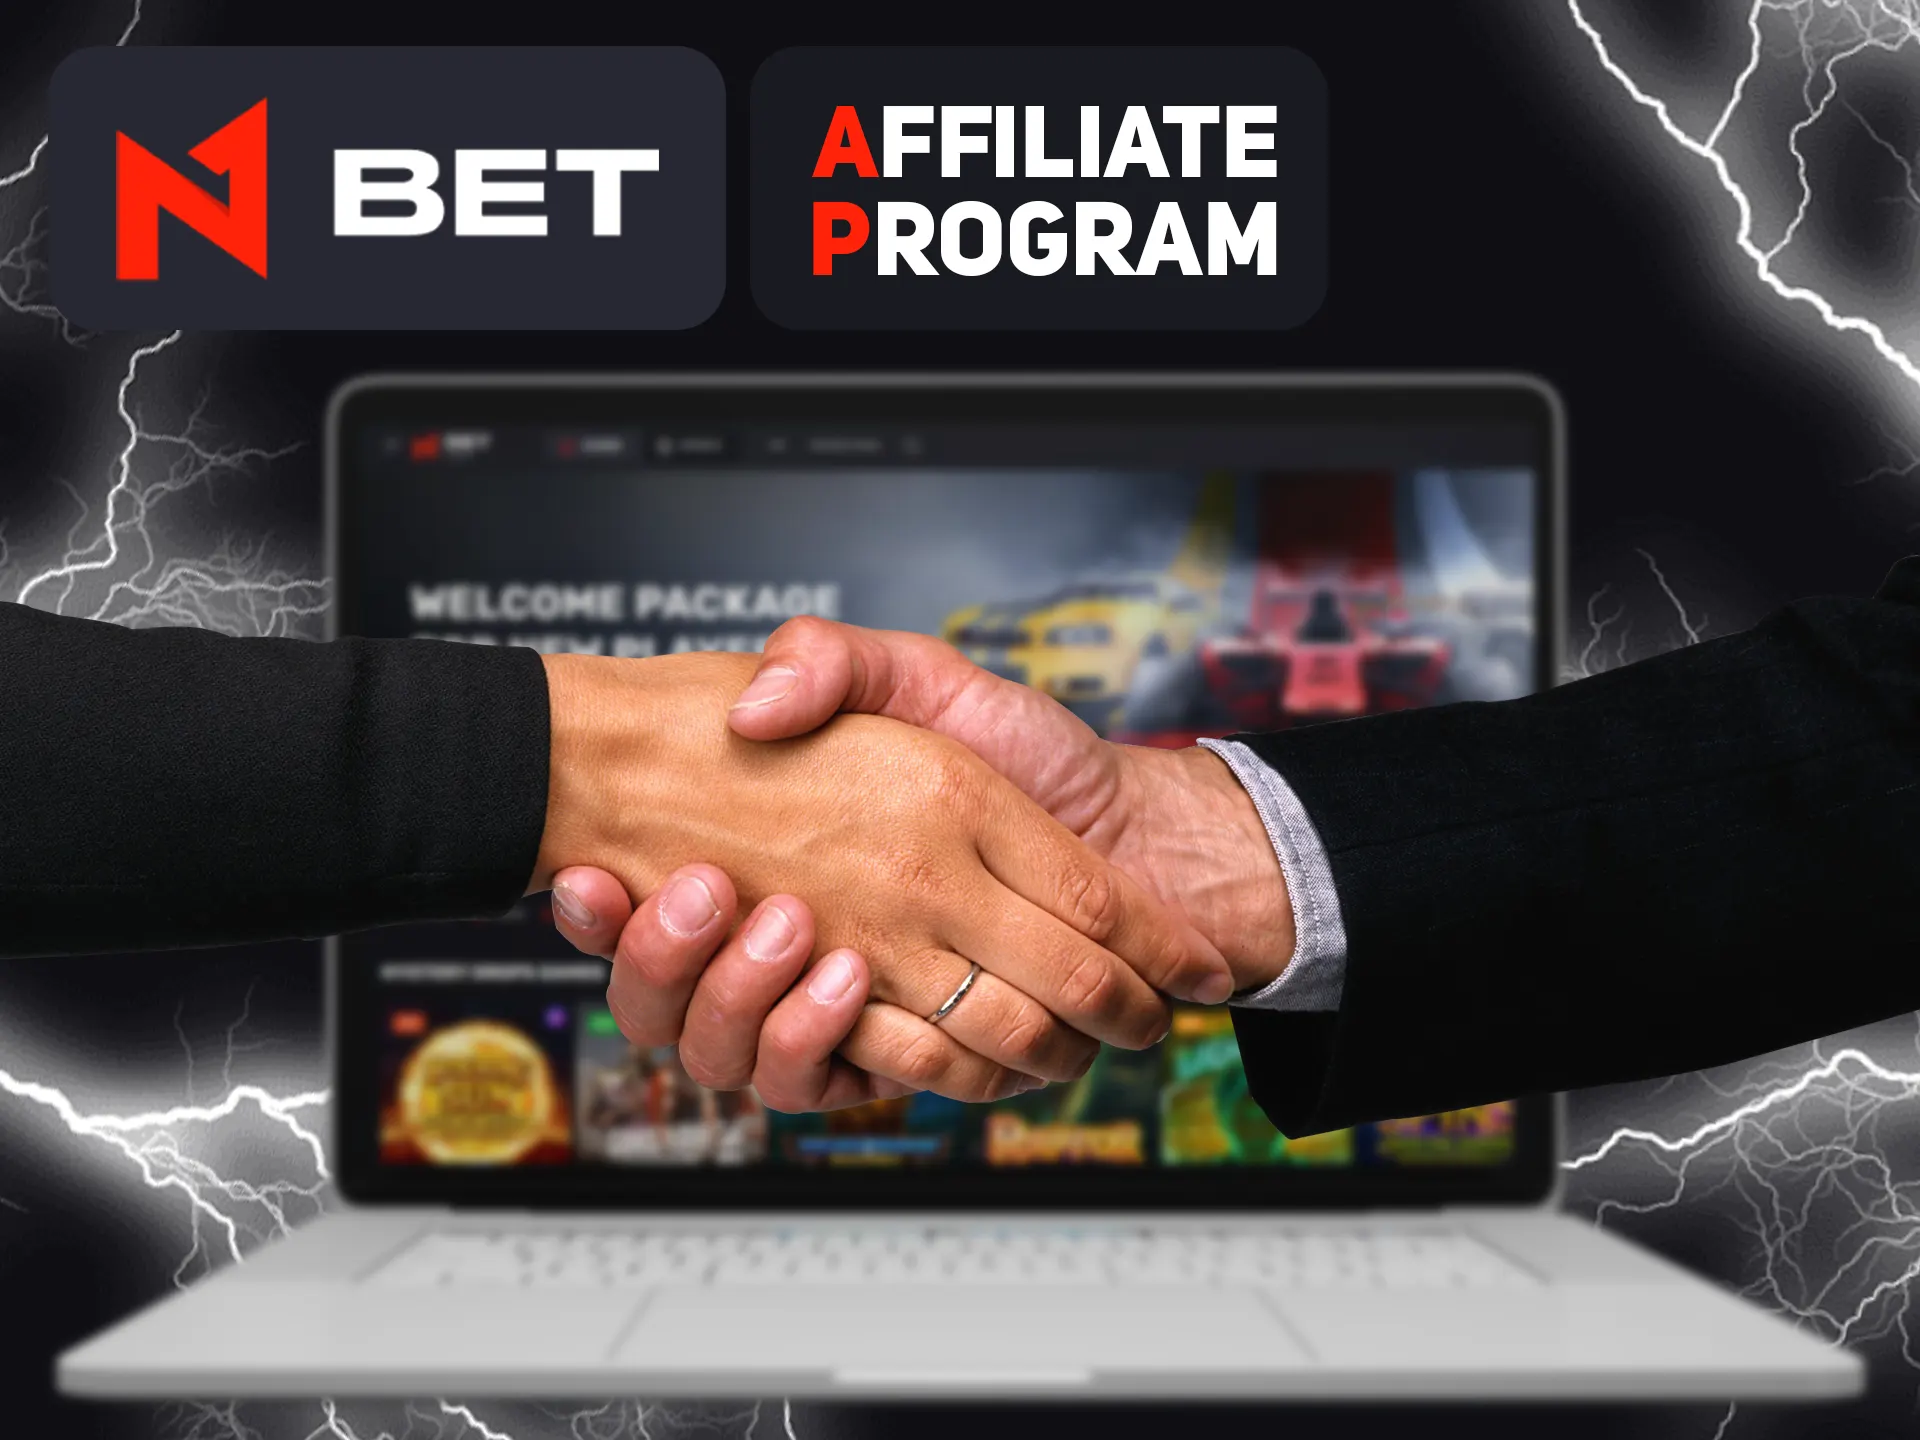 Invite your friends with special N1bet program.